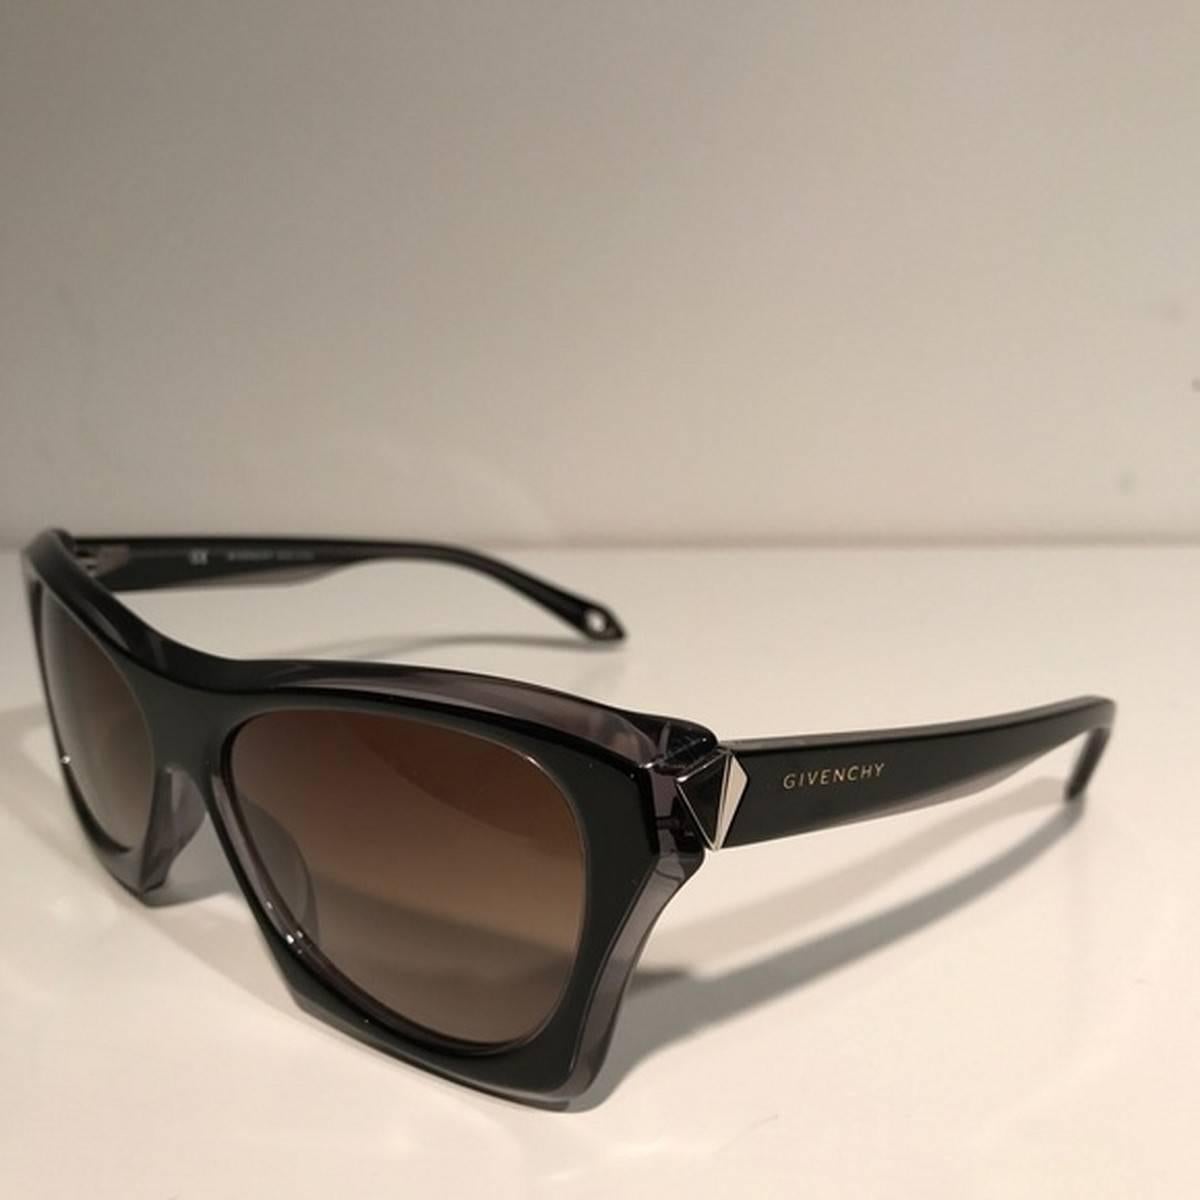 Givenchy Black Rectangular Sunglasses
Color: Black
Size: OS

Brand new with box.
Unused condition.
No flaws.
Made in Italy.